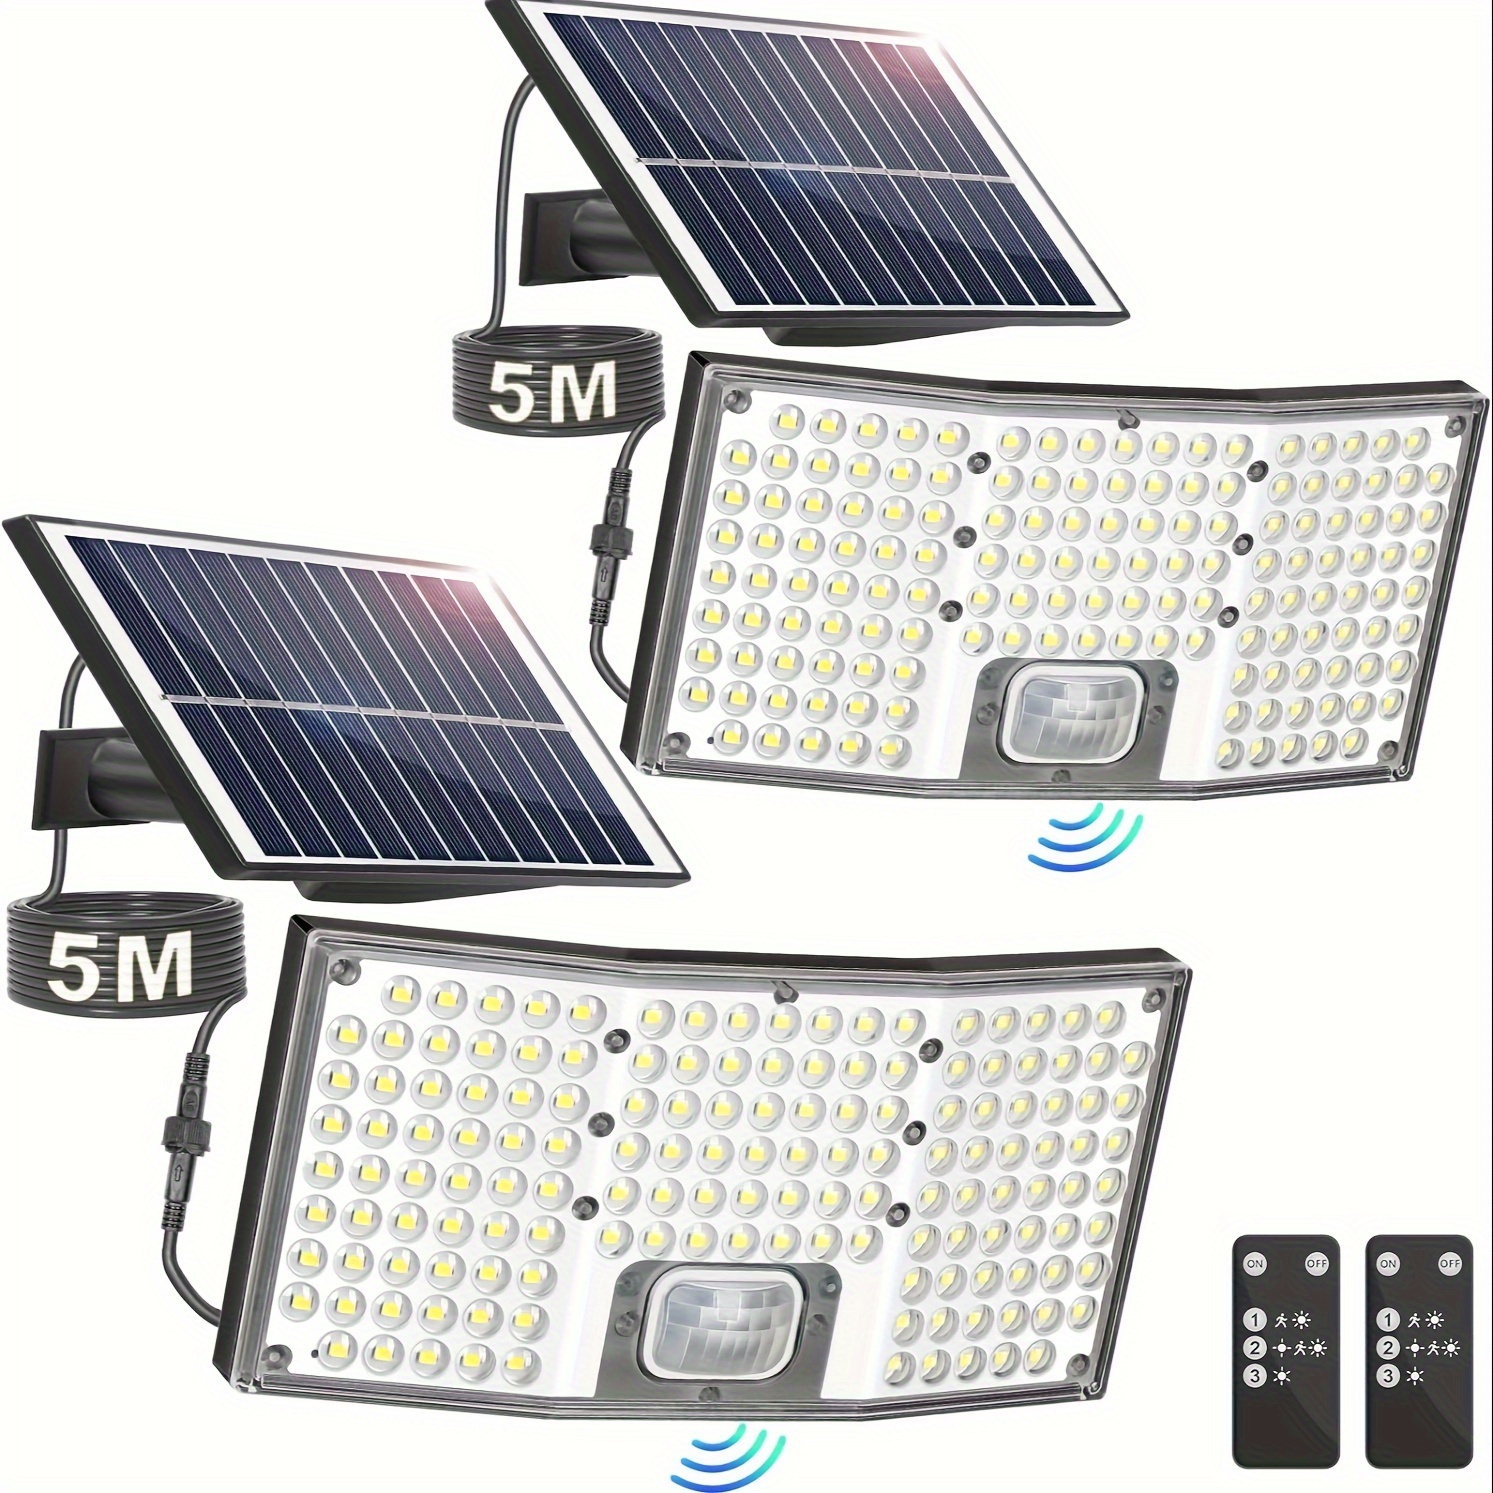 

2pc Solar Outdoor Lights Motion Sensor, 292 Led Solar Flood Lights With Remote, 4000lm Dusk To Dawn Solar Security Lights Separate Panel, 3 Modes/16.4ft Cable Solar Lighting For Outside Yard Garage